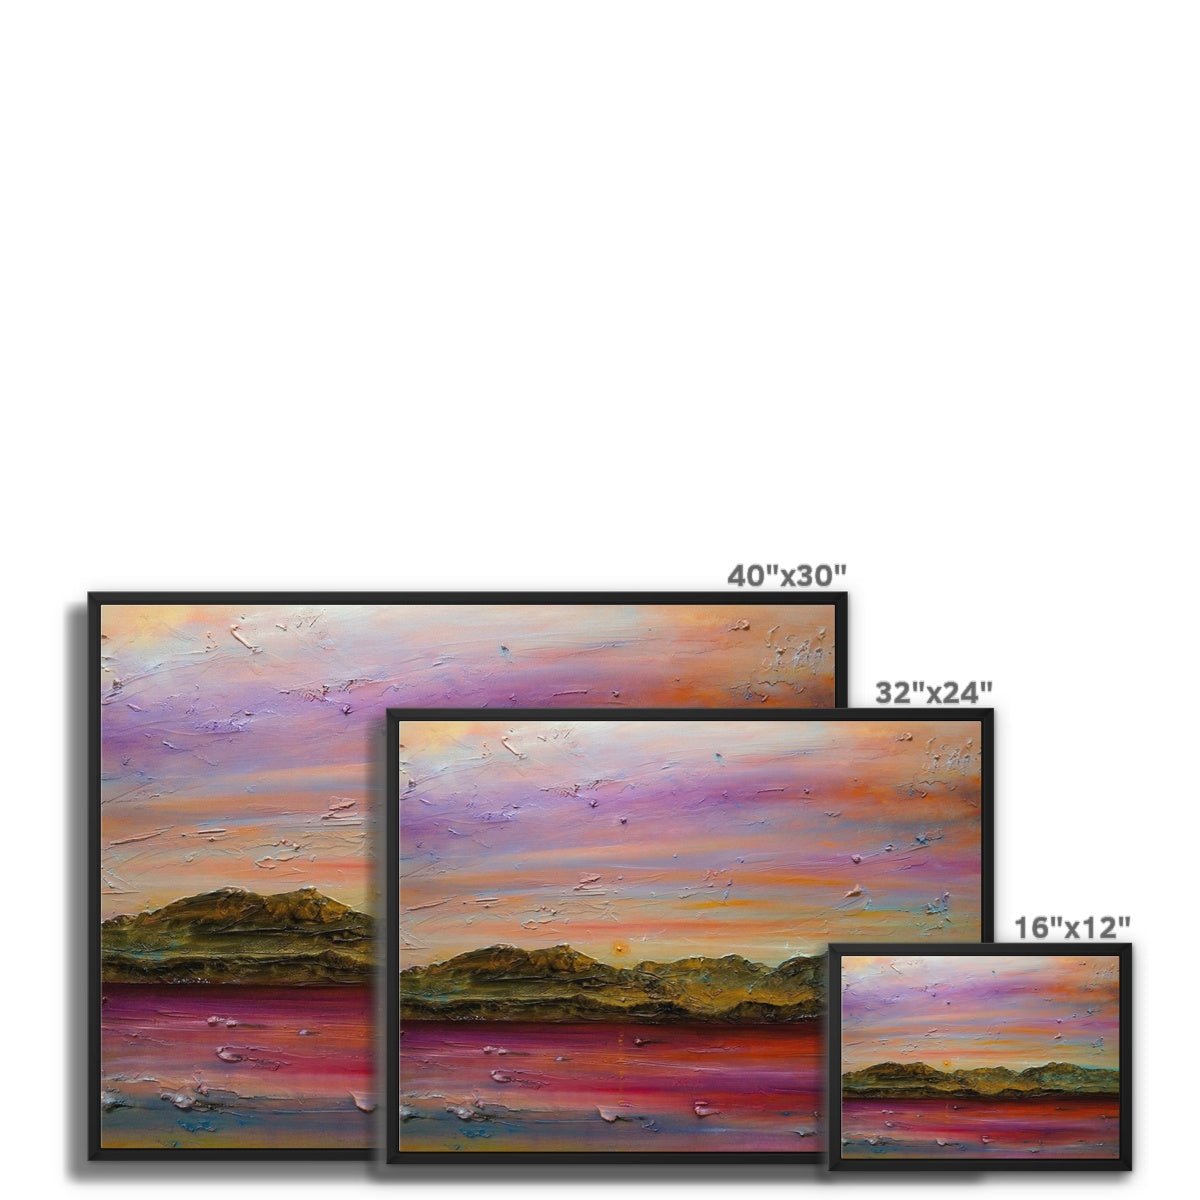 Arran Autumn Dusk Painting | Framed Canvas From Scotland-Floating Framed Canvas Prints-Arran Art Gallery-Paintings, Prints, Homeware, Art Gifts From Scotland By Scottish Artist Kevin Hunter